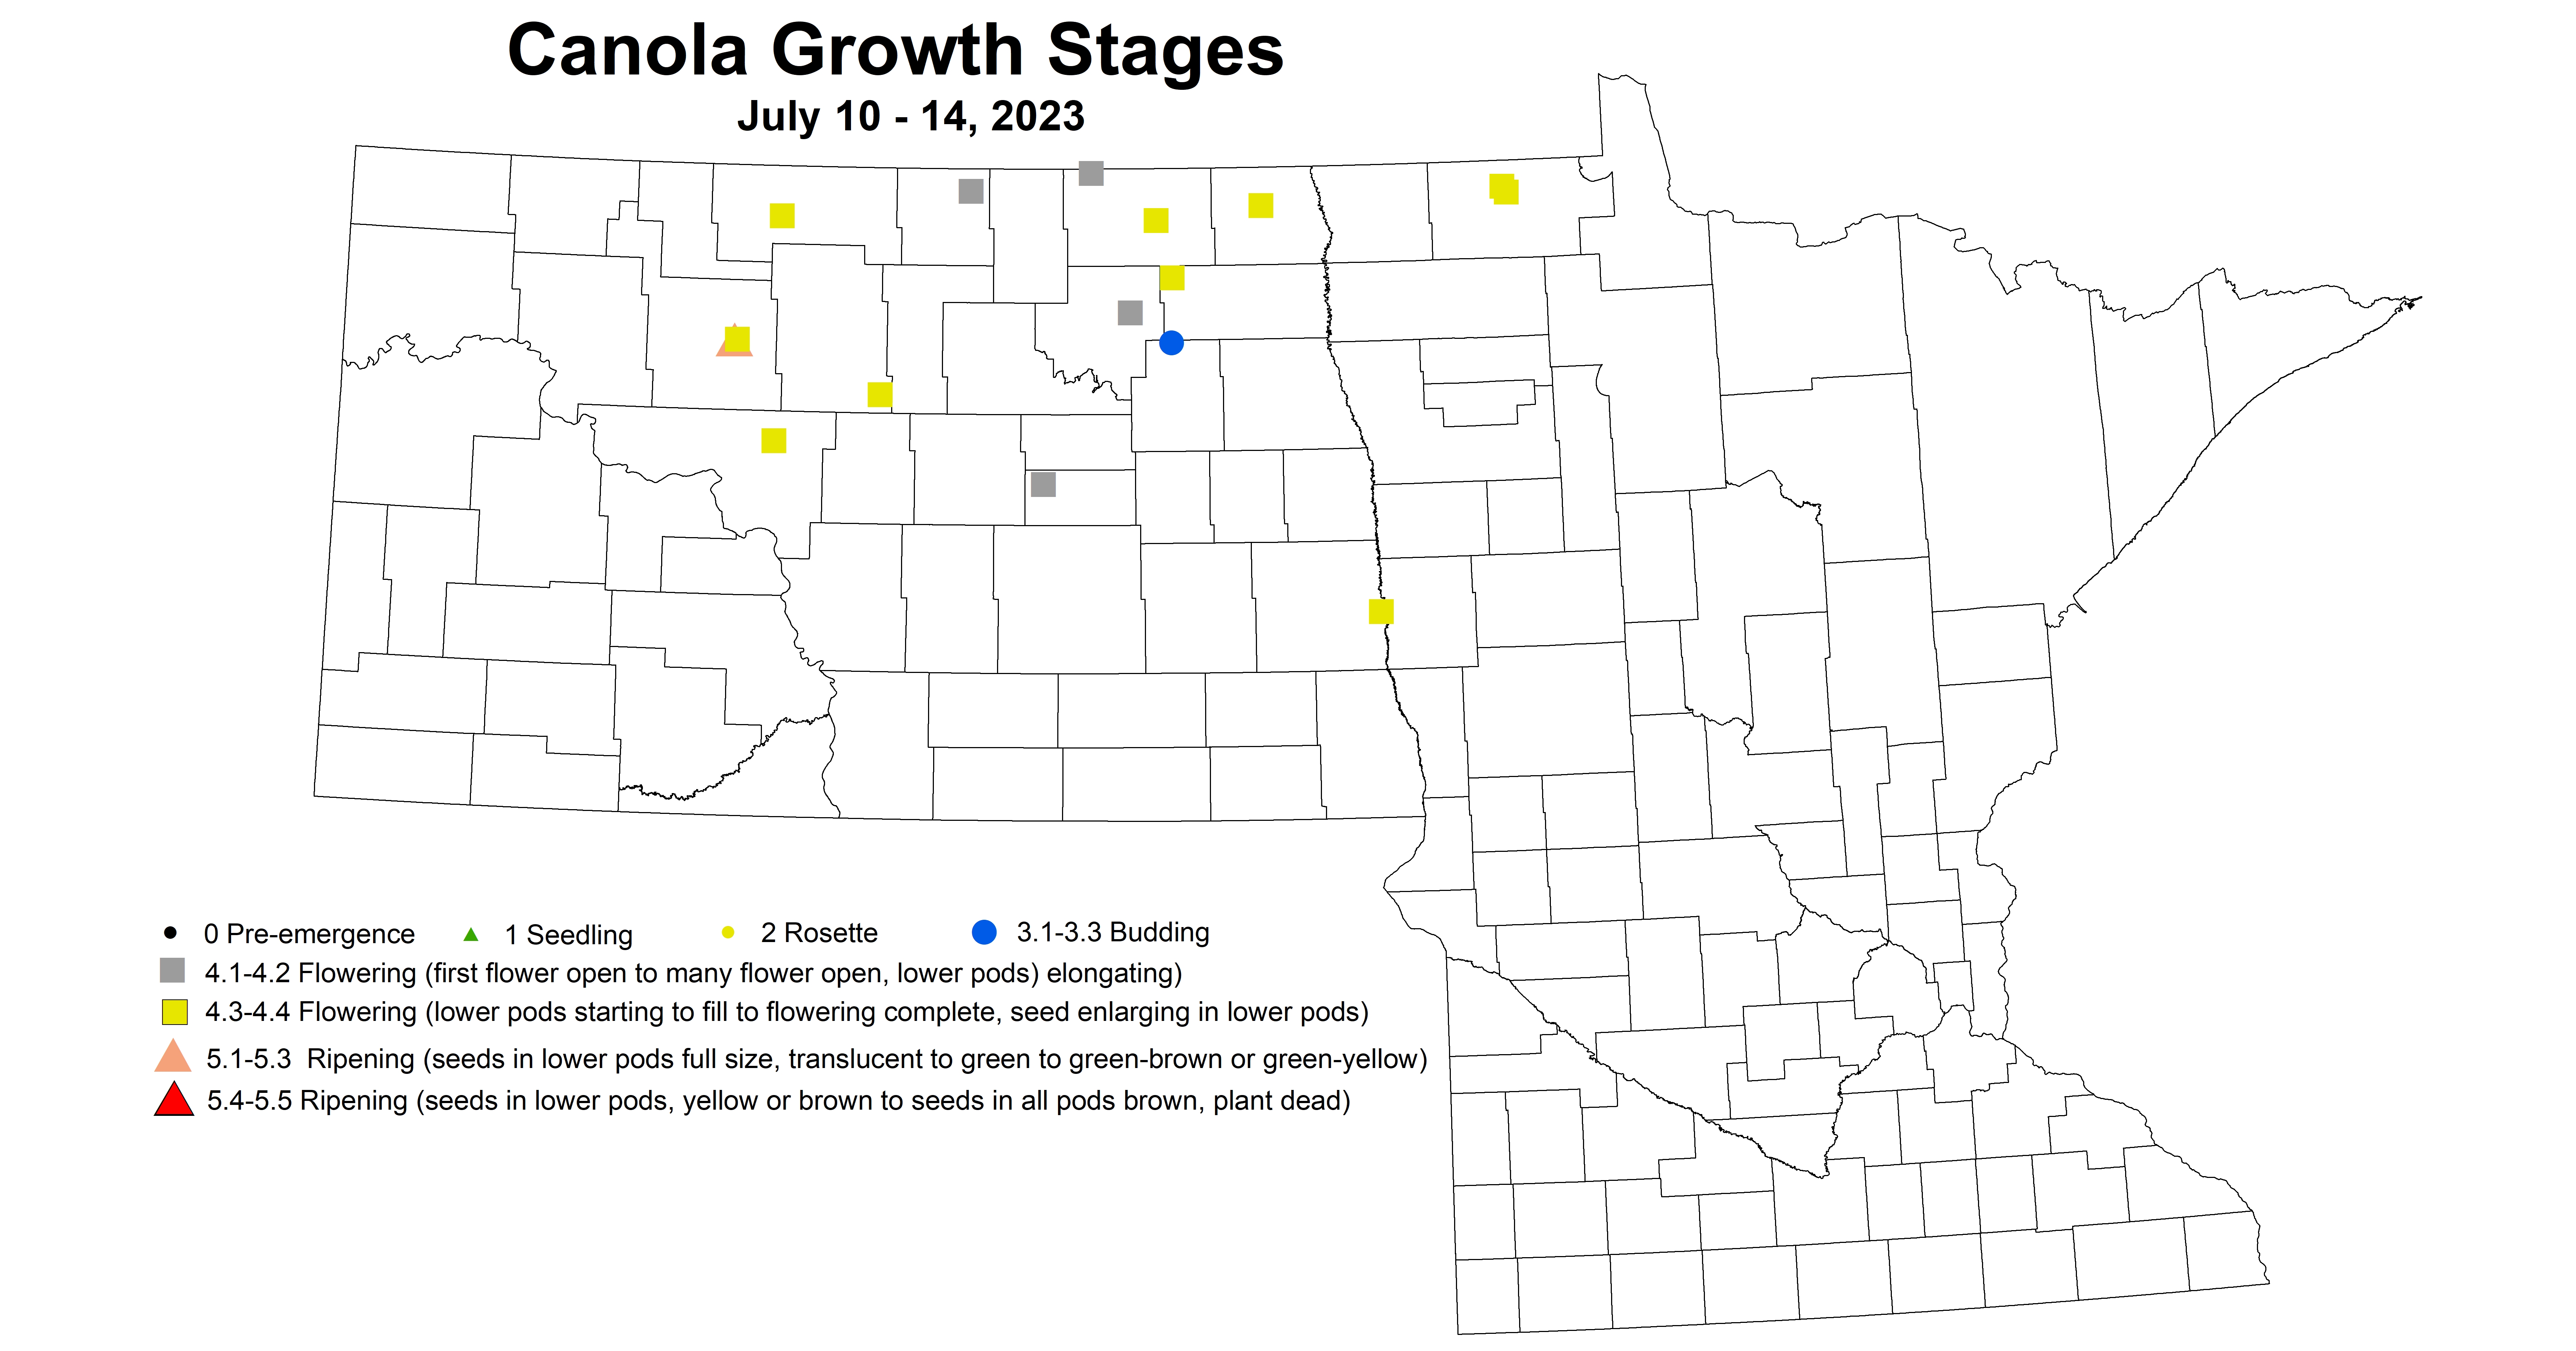 canola growth stages July 10-14 2023